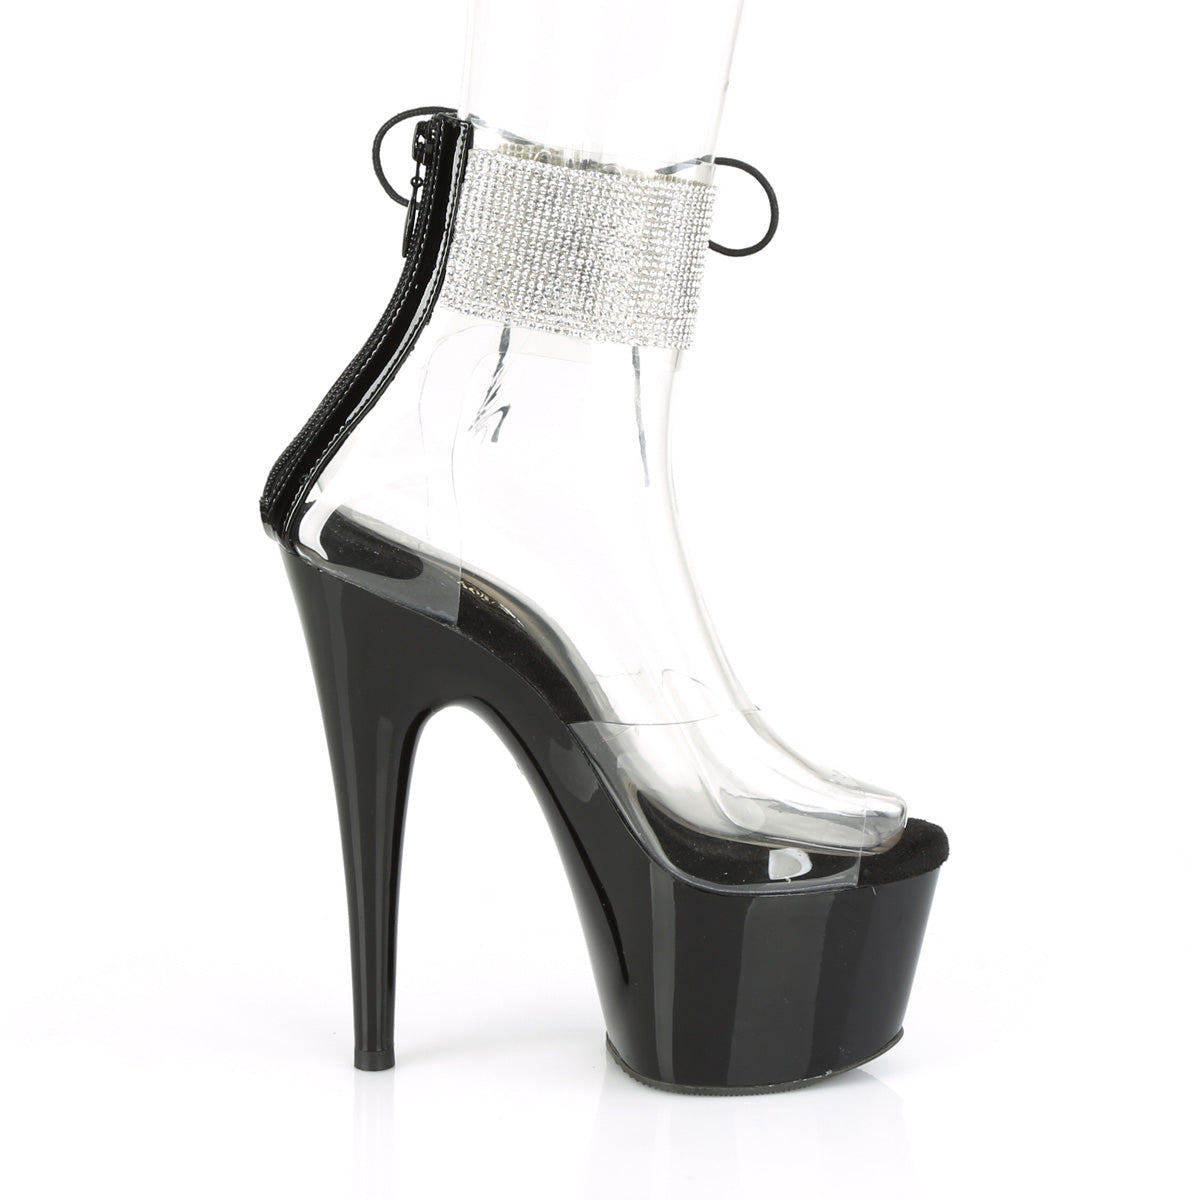 ADORE-724RS Pleaser Pole Dancing Shoes 7 Inch Heel Pleasers - Sexy Shoes Fetish Heels